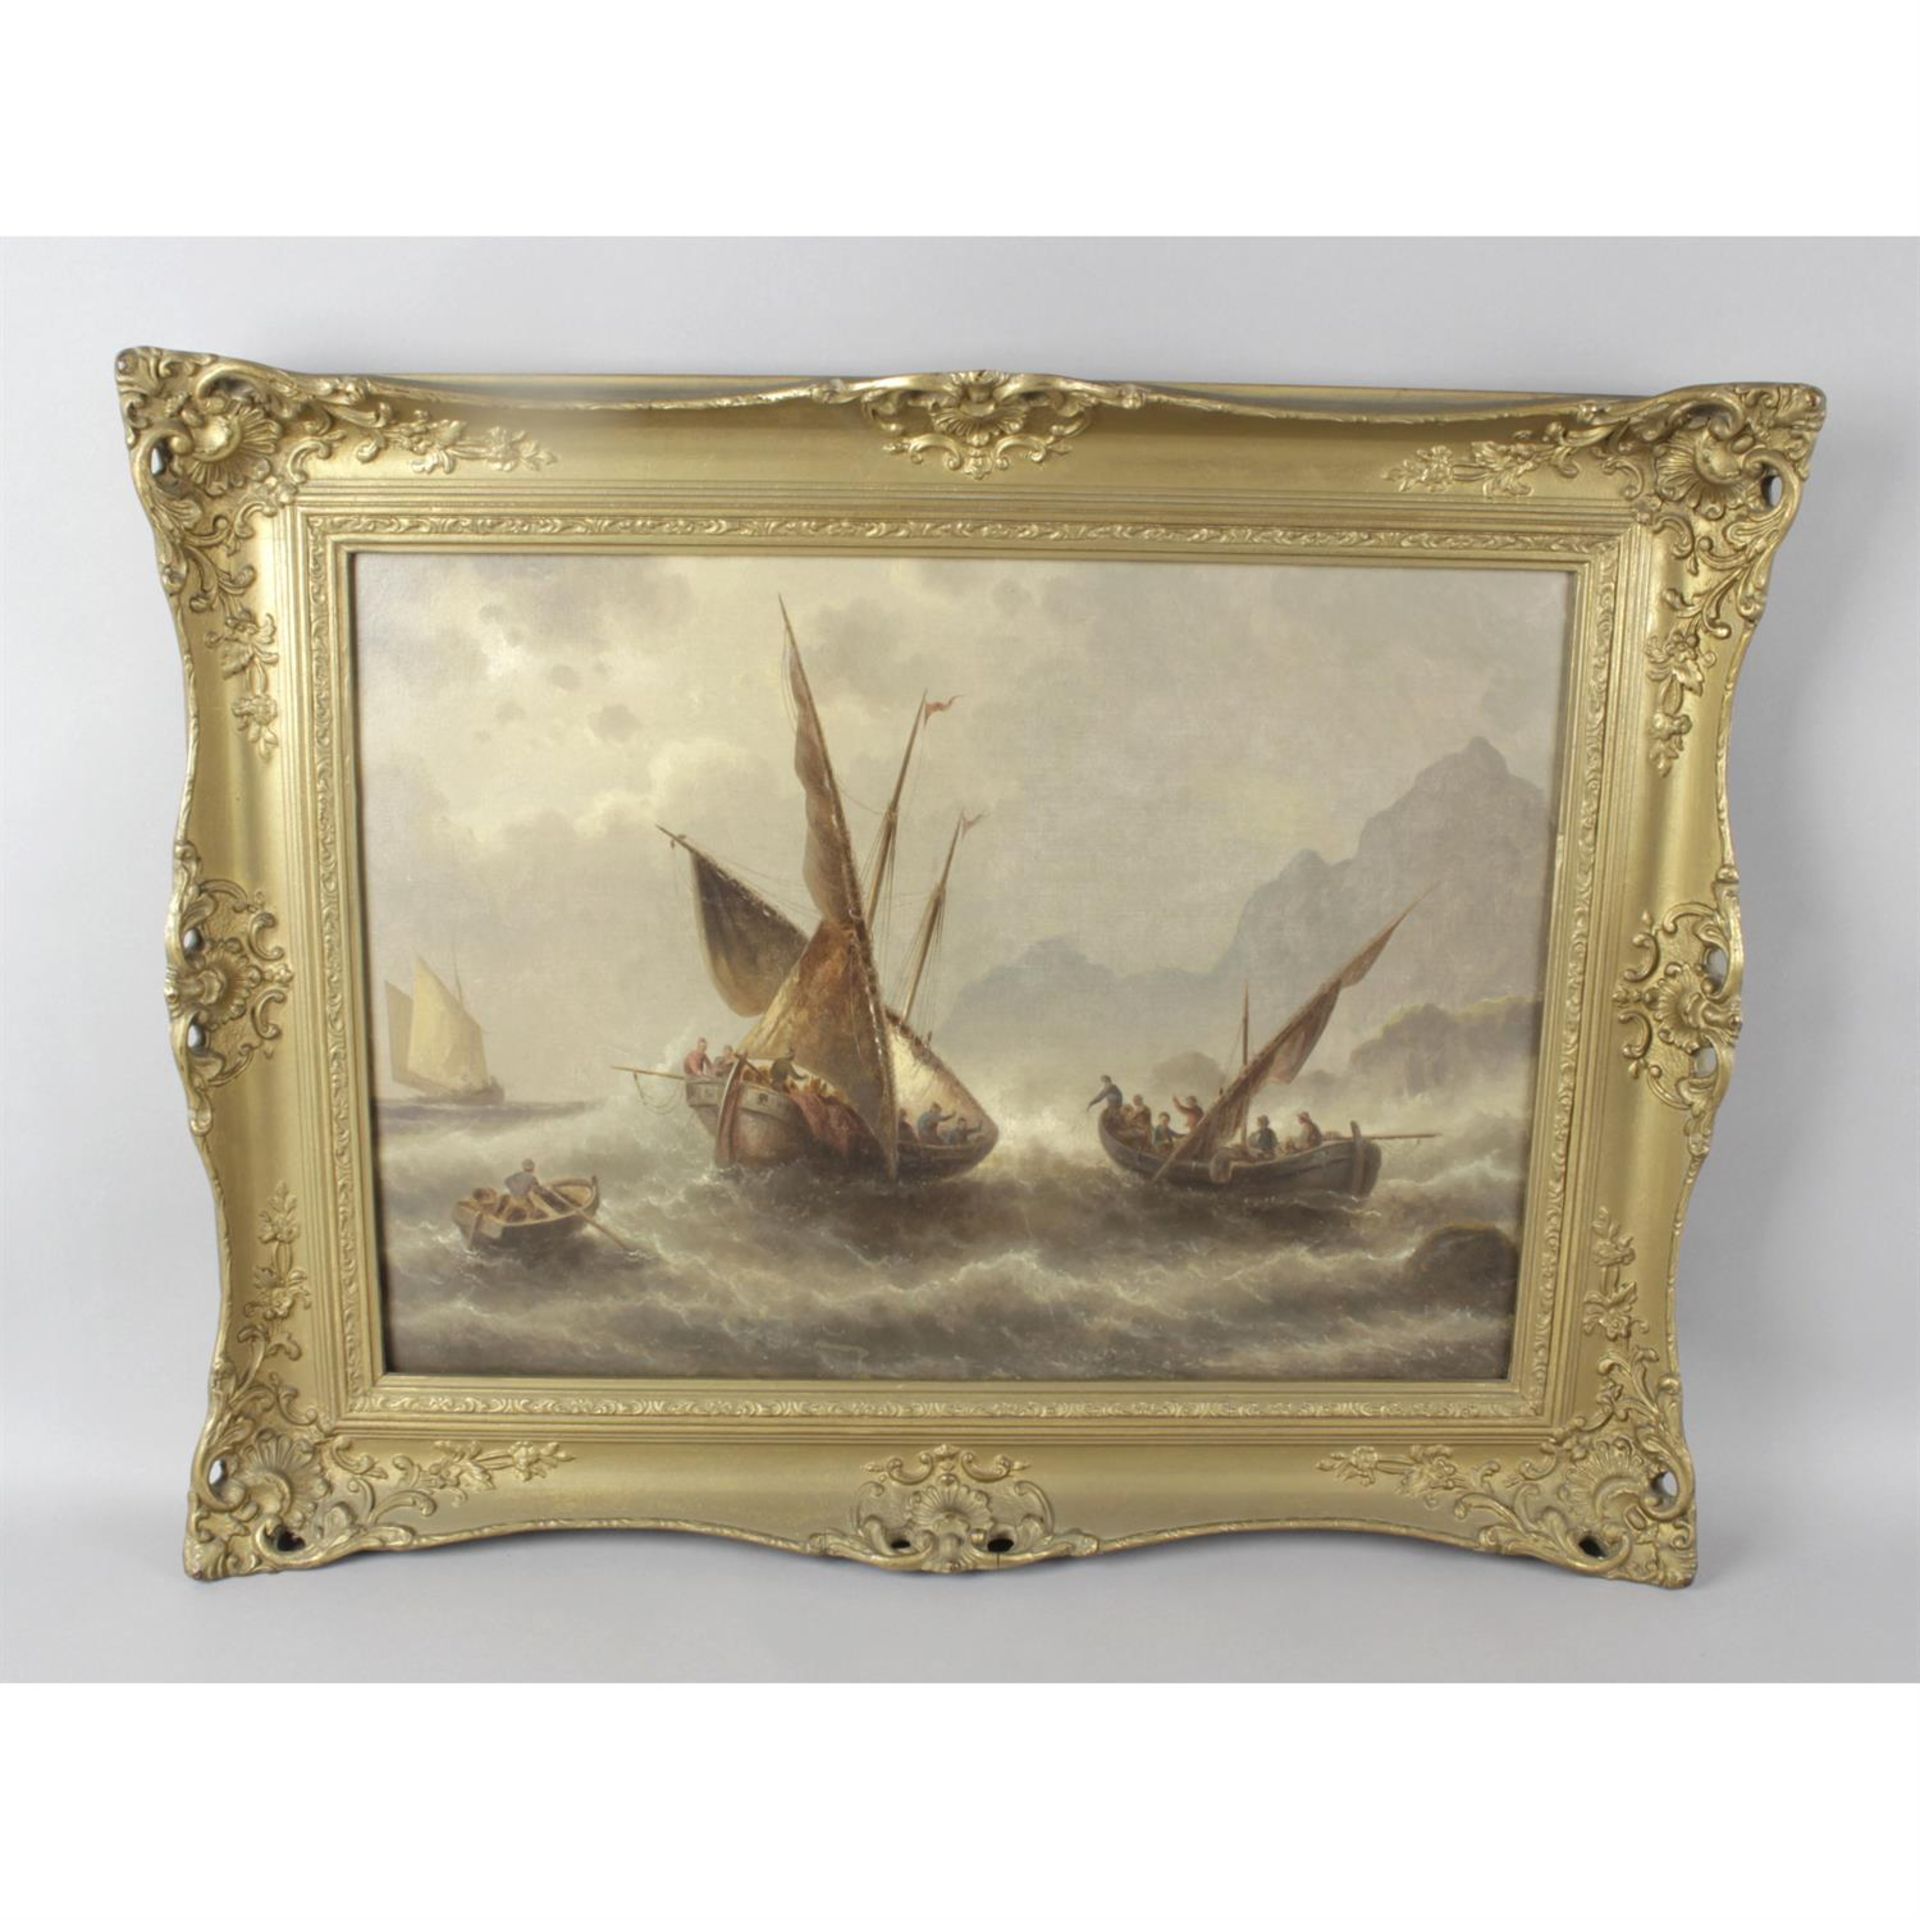 A 19th century oil painting on canvas of a stormy seascape. - Image 2 of 2